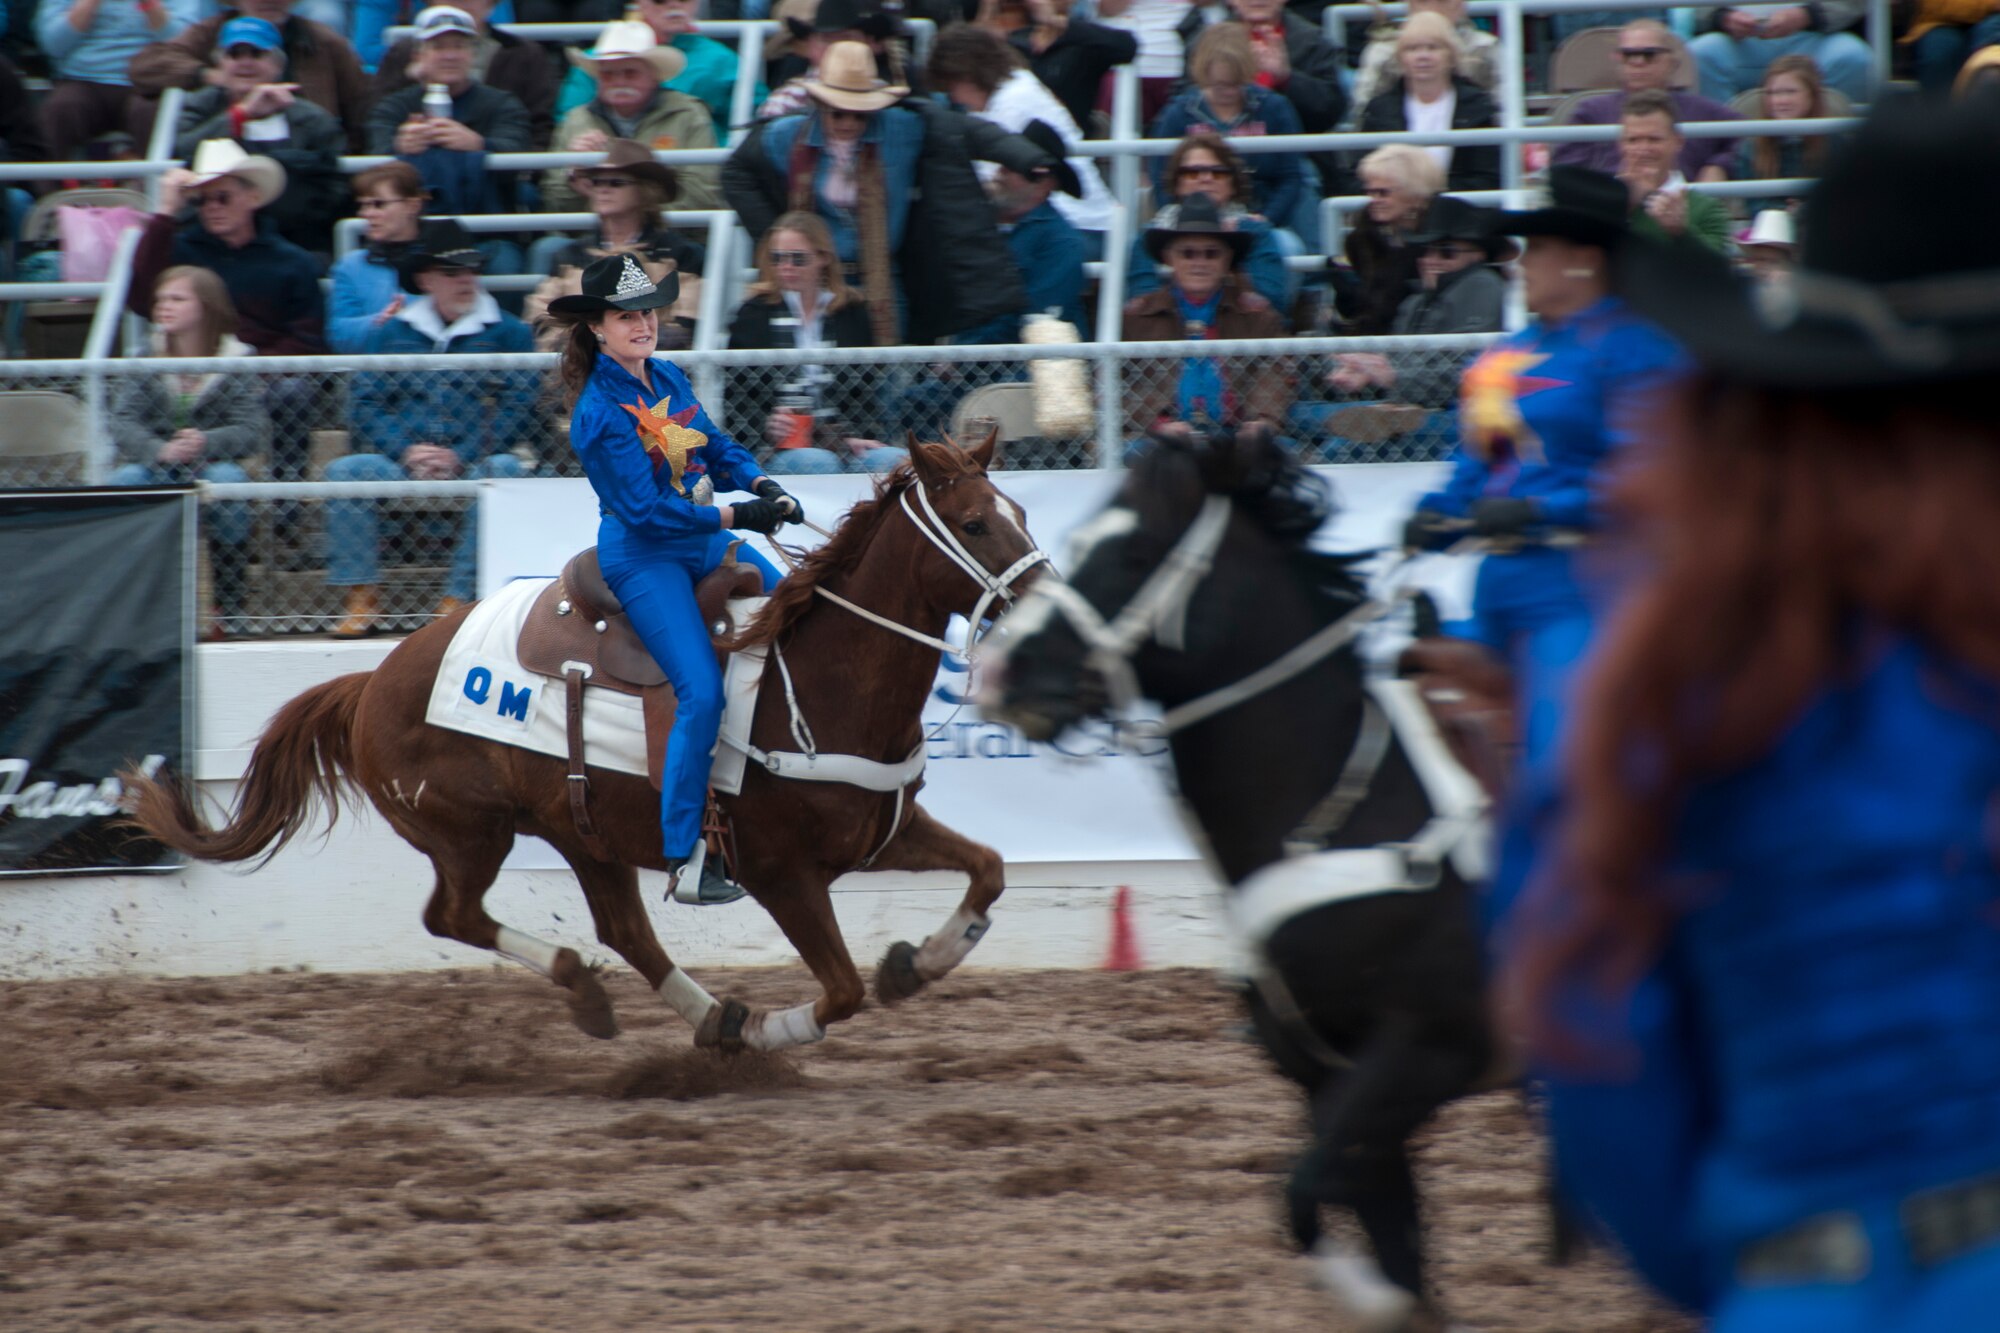 Tech. Sgt. Lacey Johnson, a member of the 162nd host aviation resource management office, was crowned Tucson Rodeo Attendent, a princess, for the 2001 Tucson Rodeo. This year Johnson is performing with the Quadrille de Mujeres, an equestrian drill team known for their speed and precision. (Photo provided by Tech. Sgt. Lacey Johnson)

